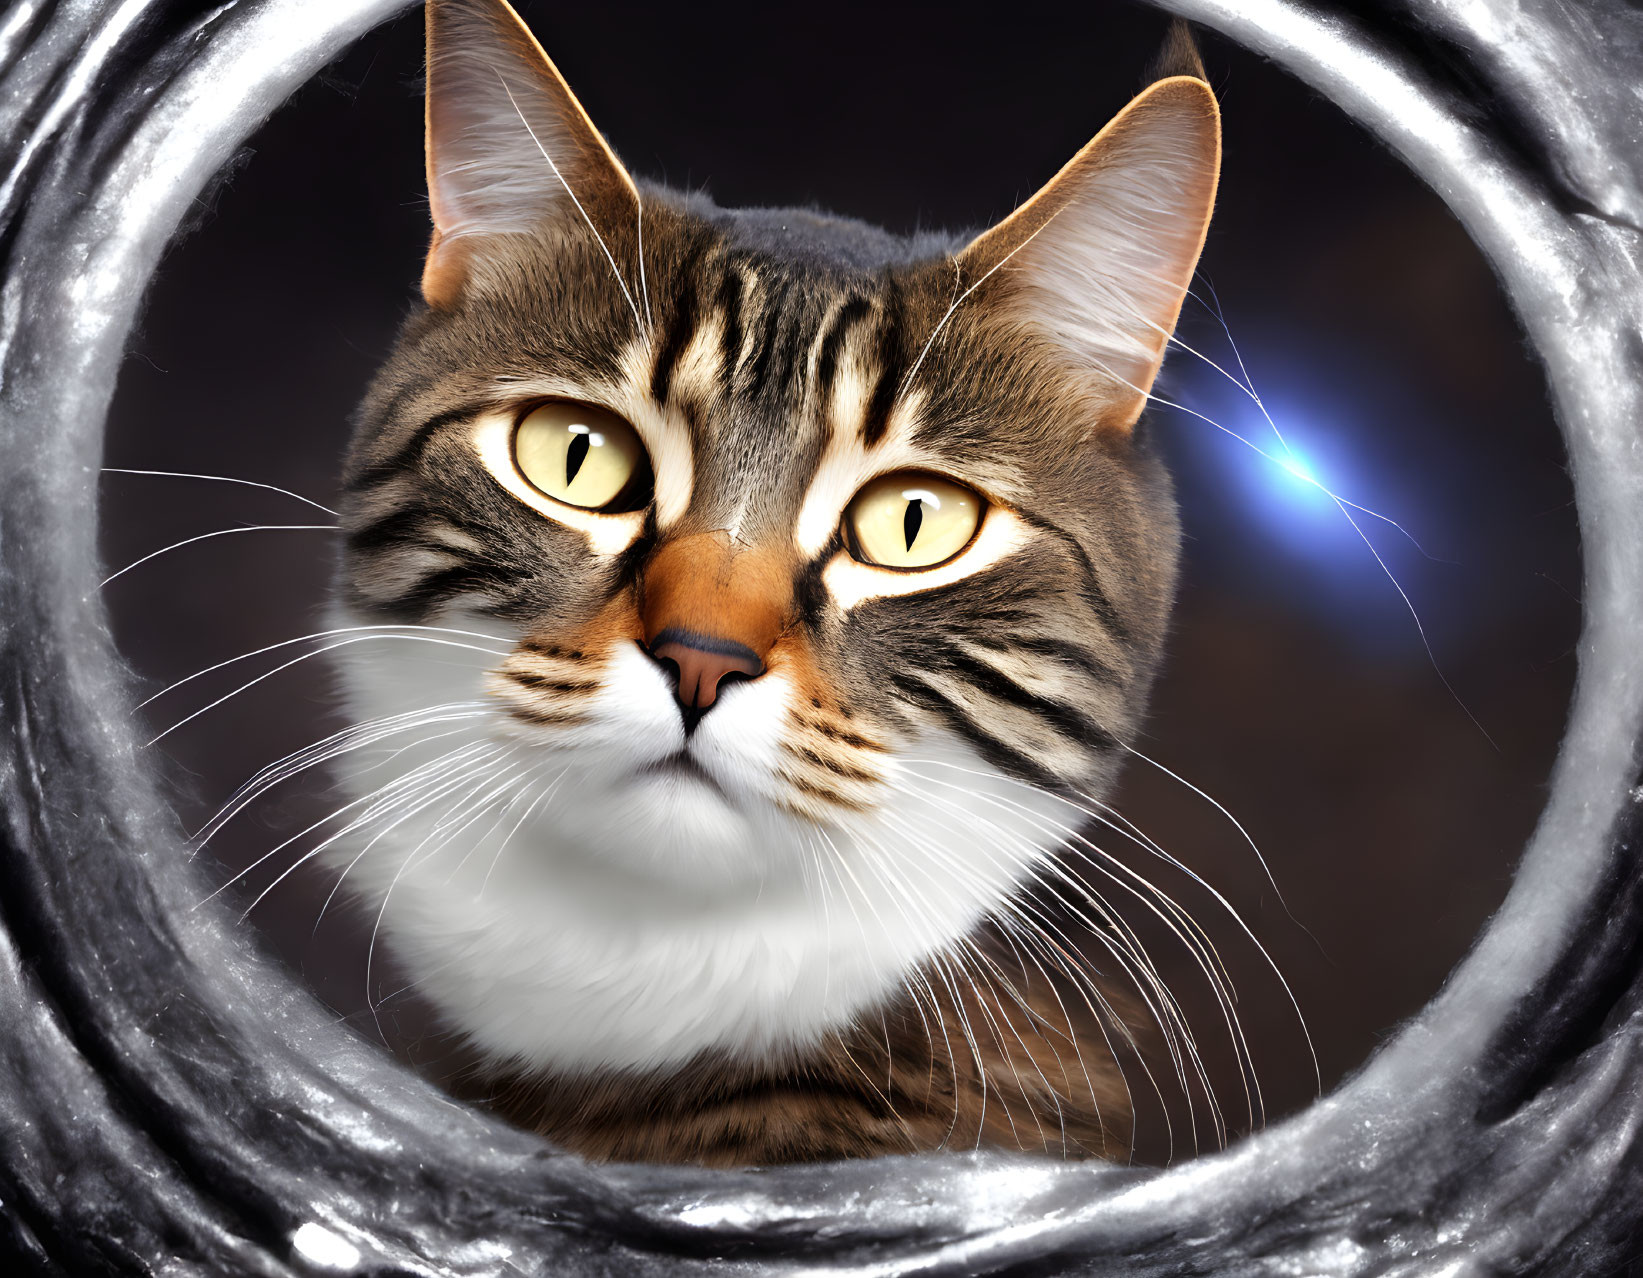 Tabby Cat with Yellow Eyes in Circular Frame on Dark Background